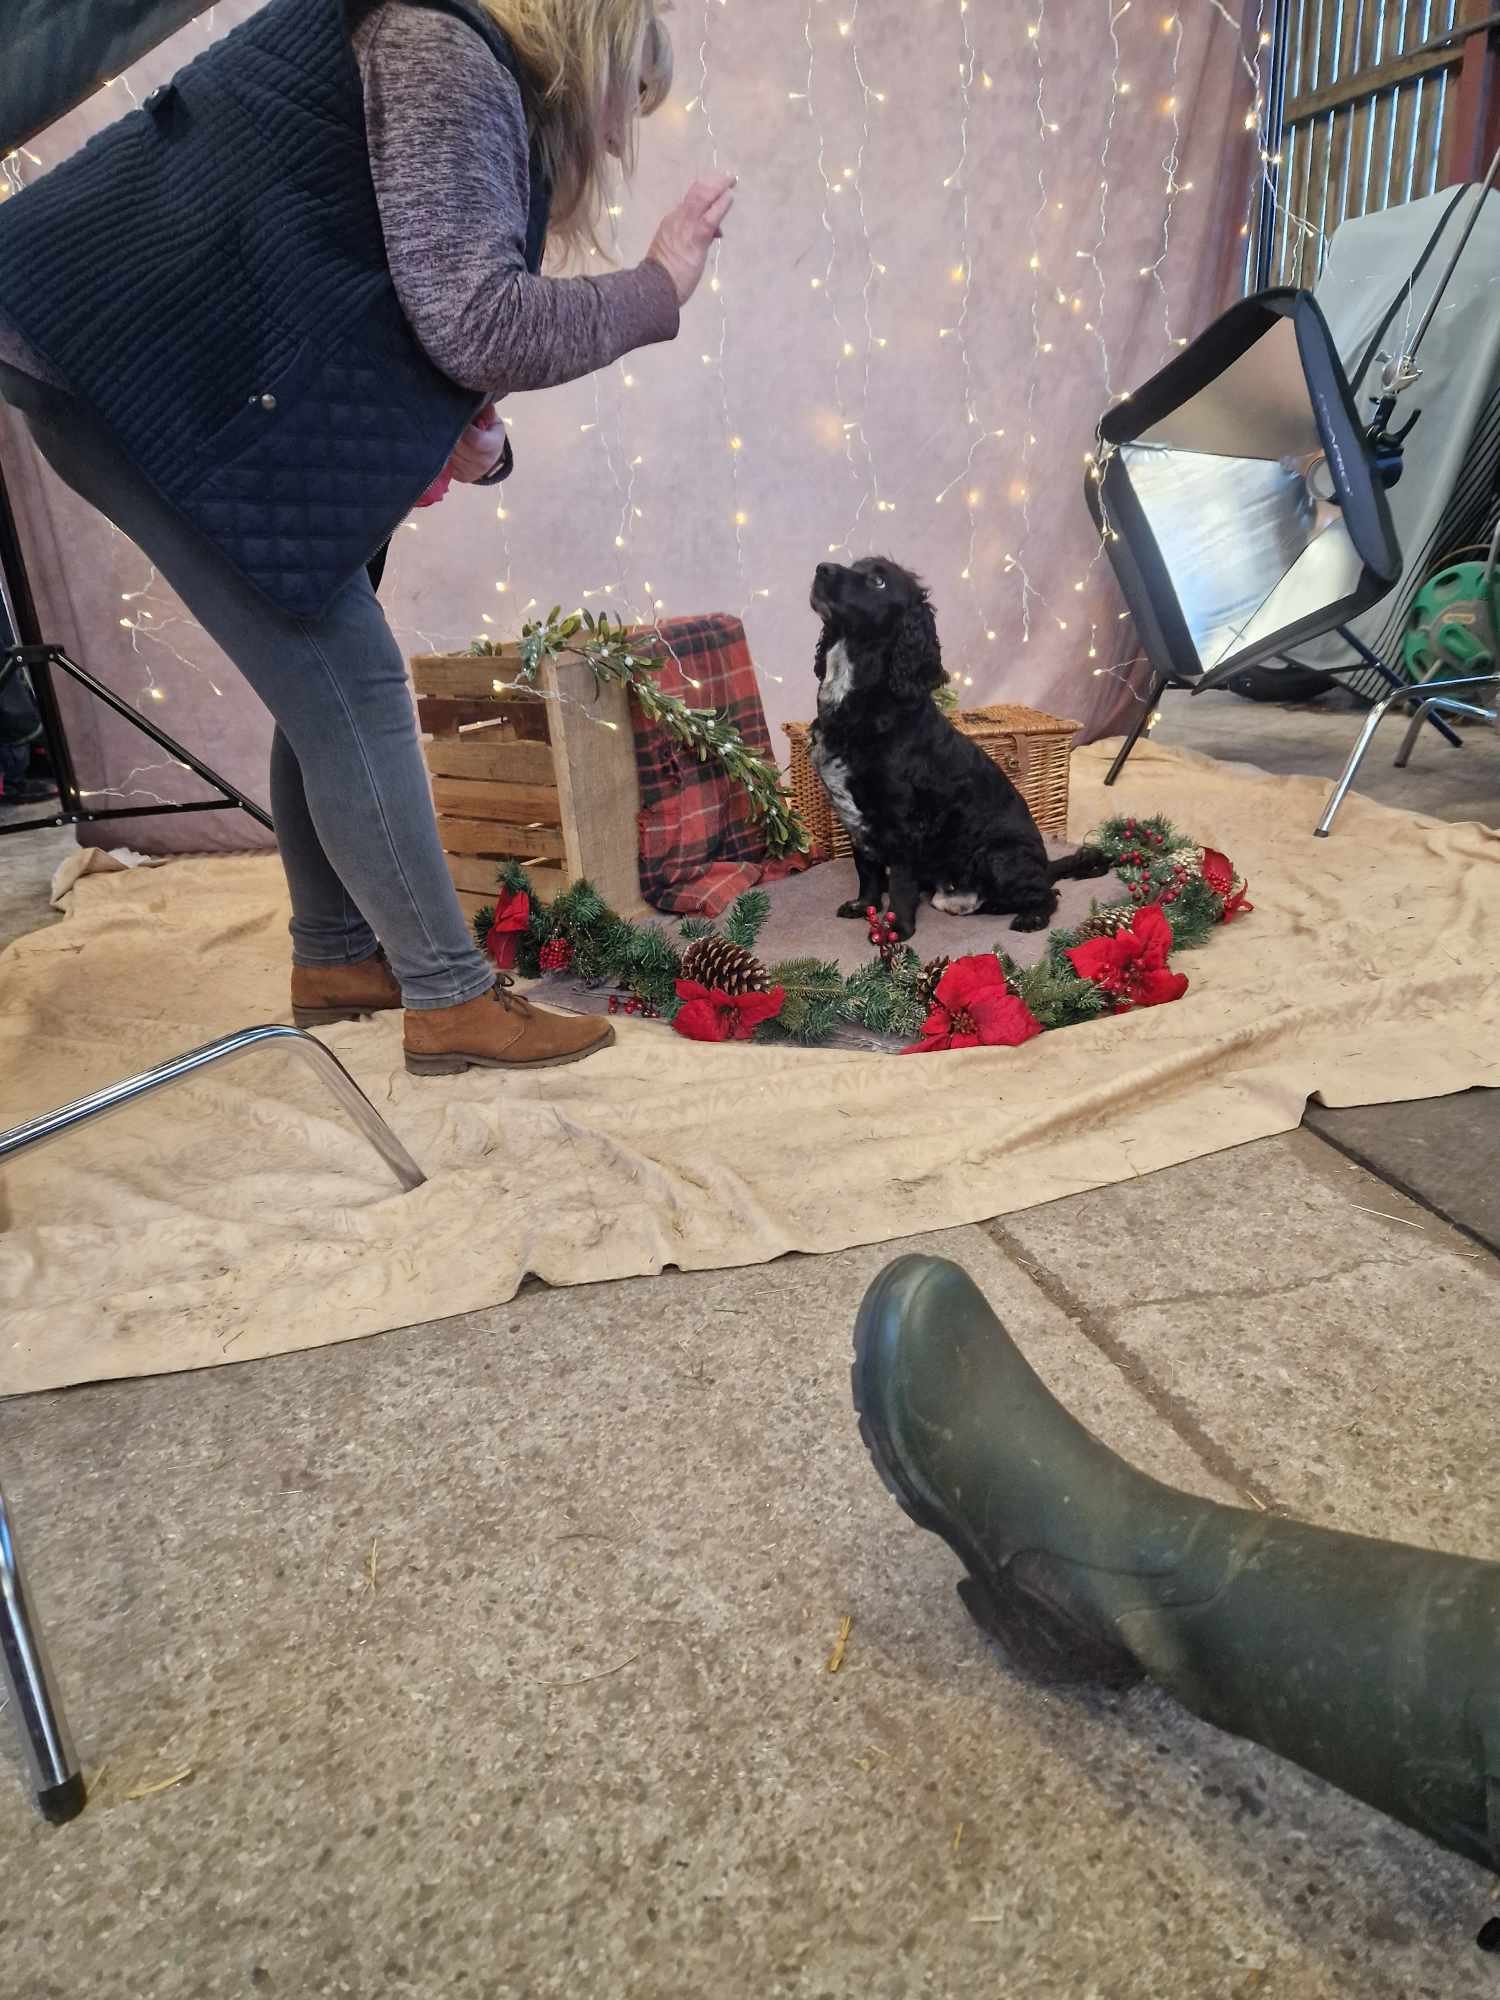 BTS for the festive dog portrait day